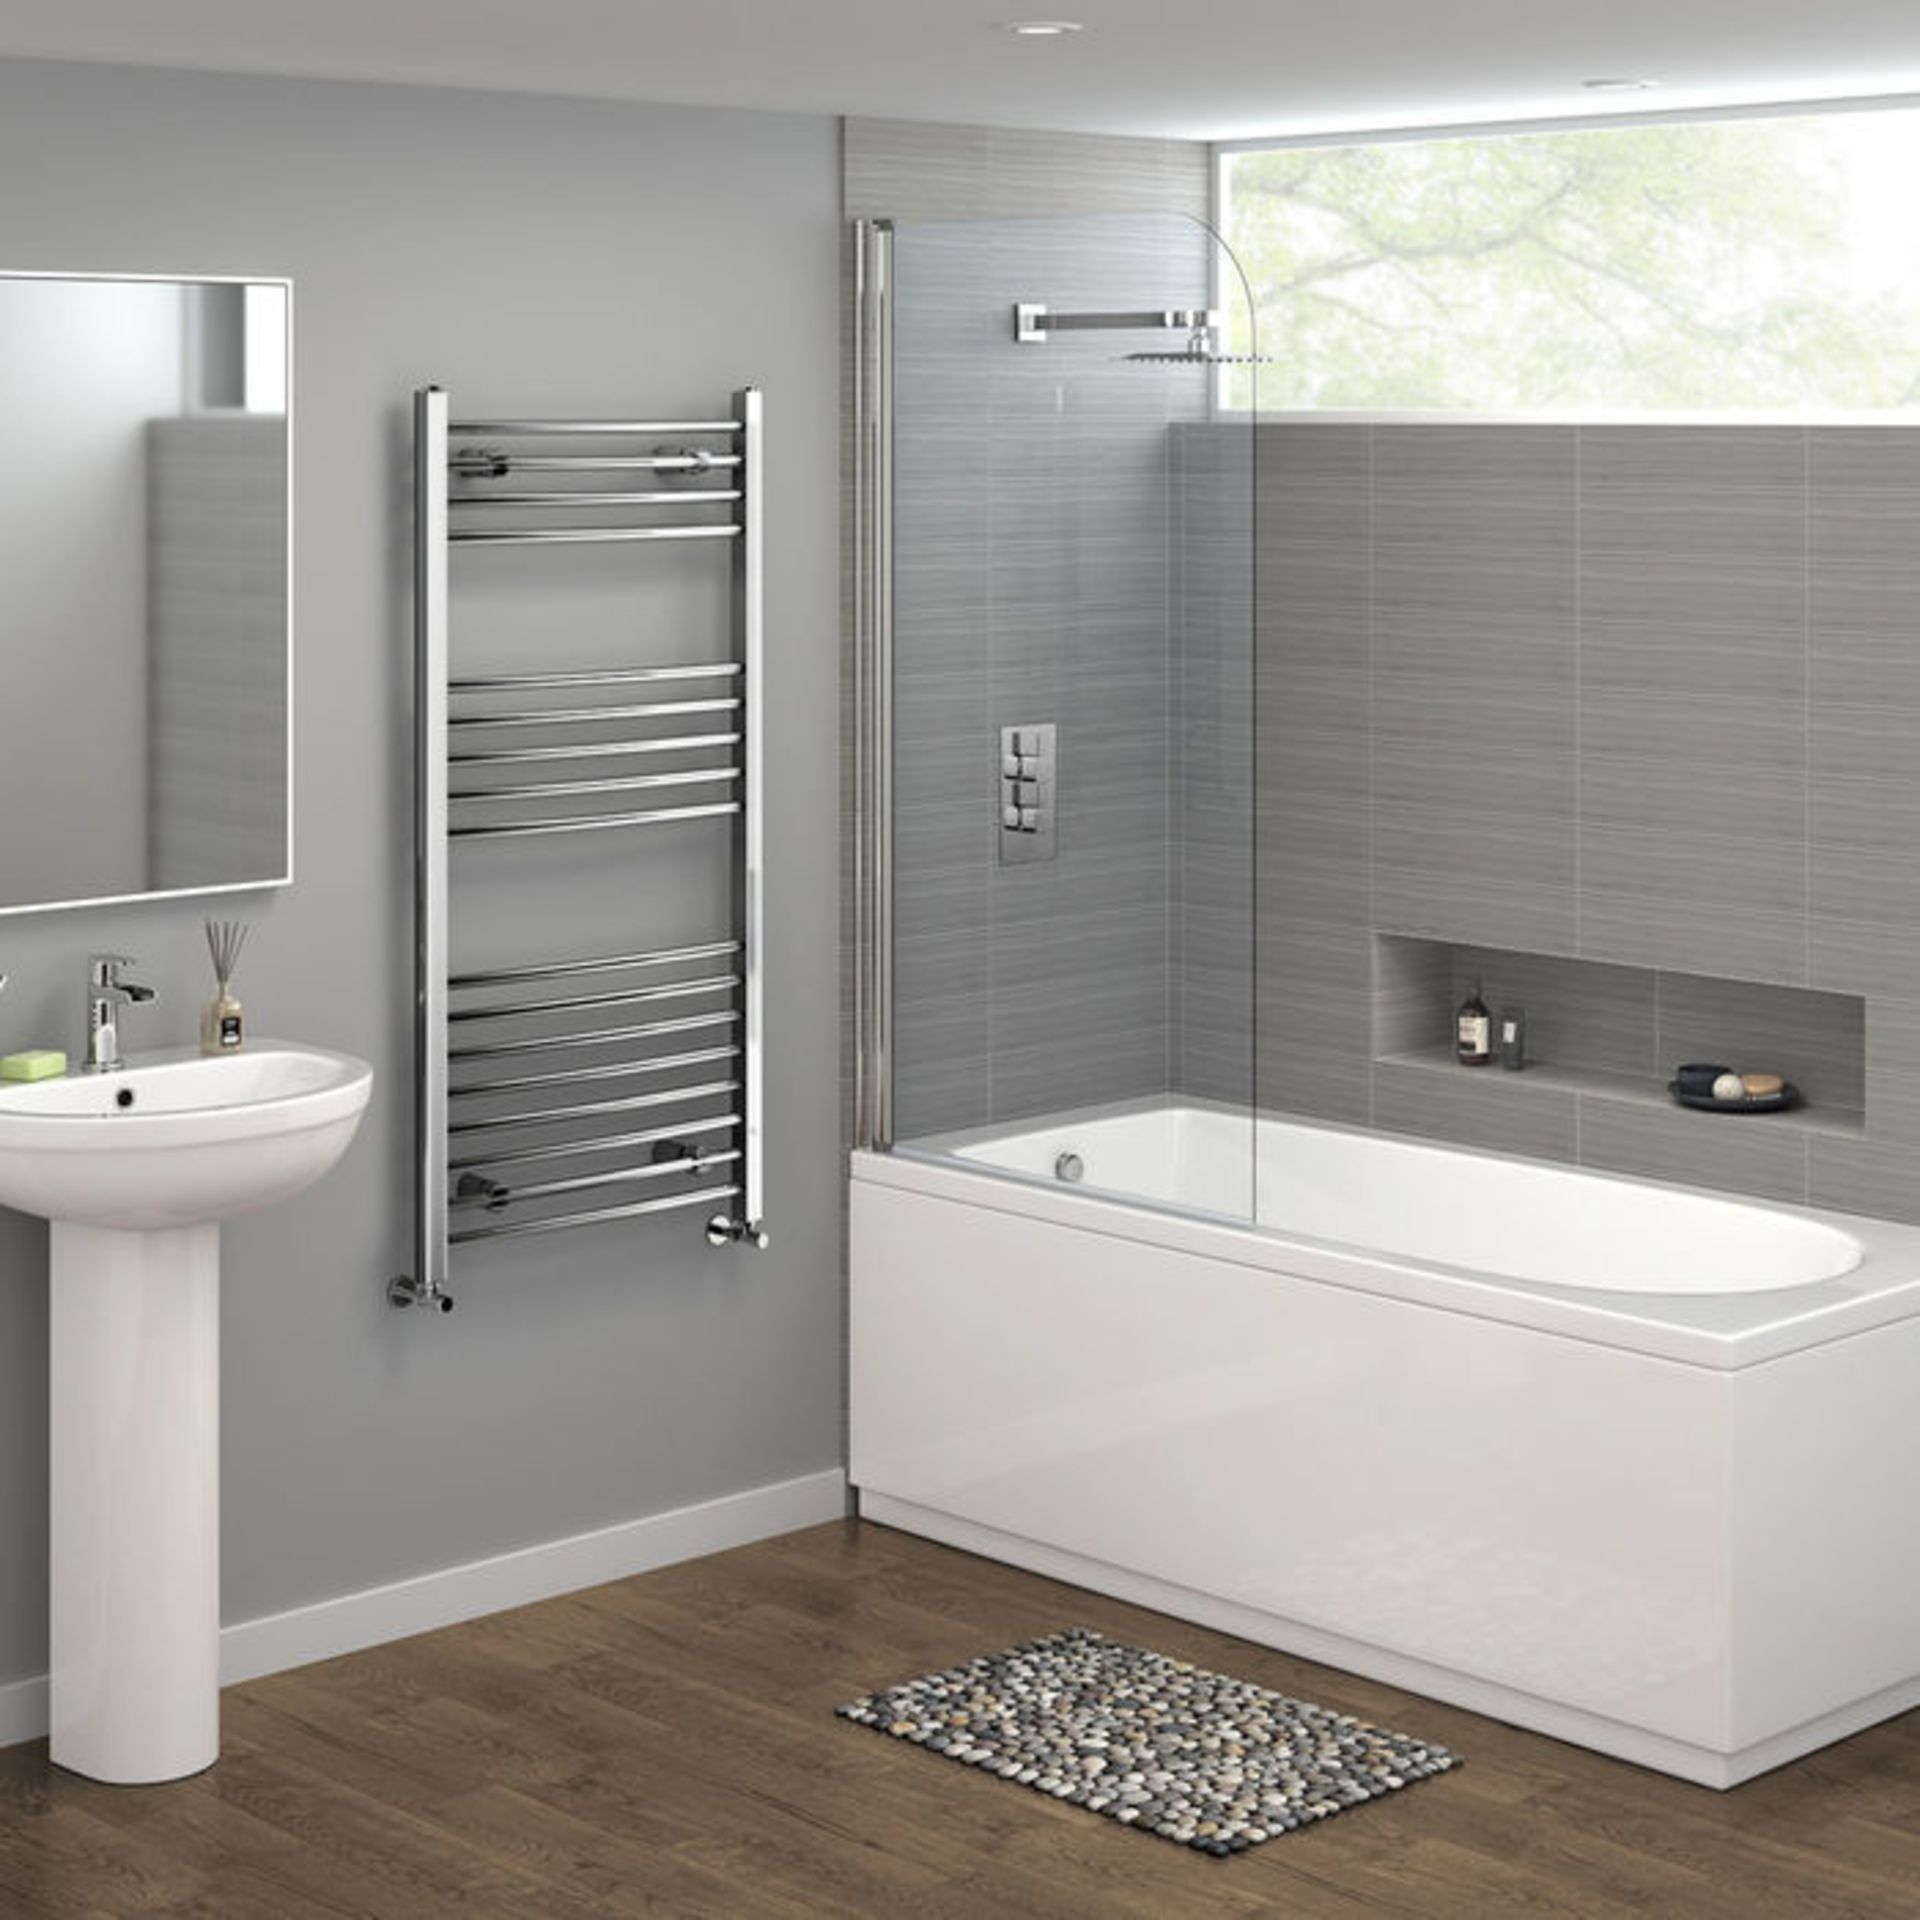 (DK28) 1200x600mm - 20mm Tubes - Chrome Curved Rail Ladder Towel Radiator. Made from chrome plated - Image 2 of 3